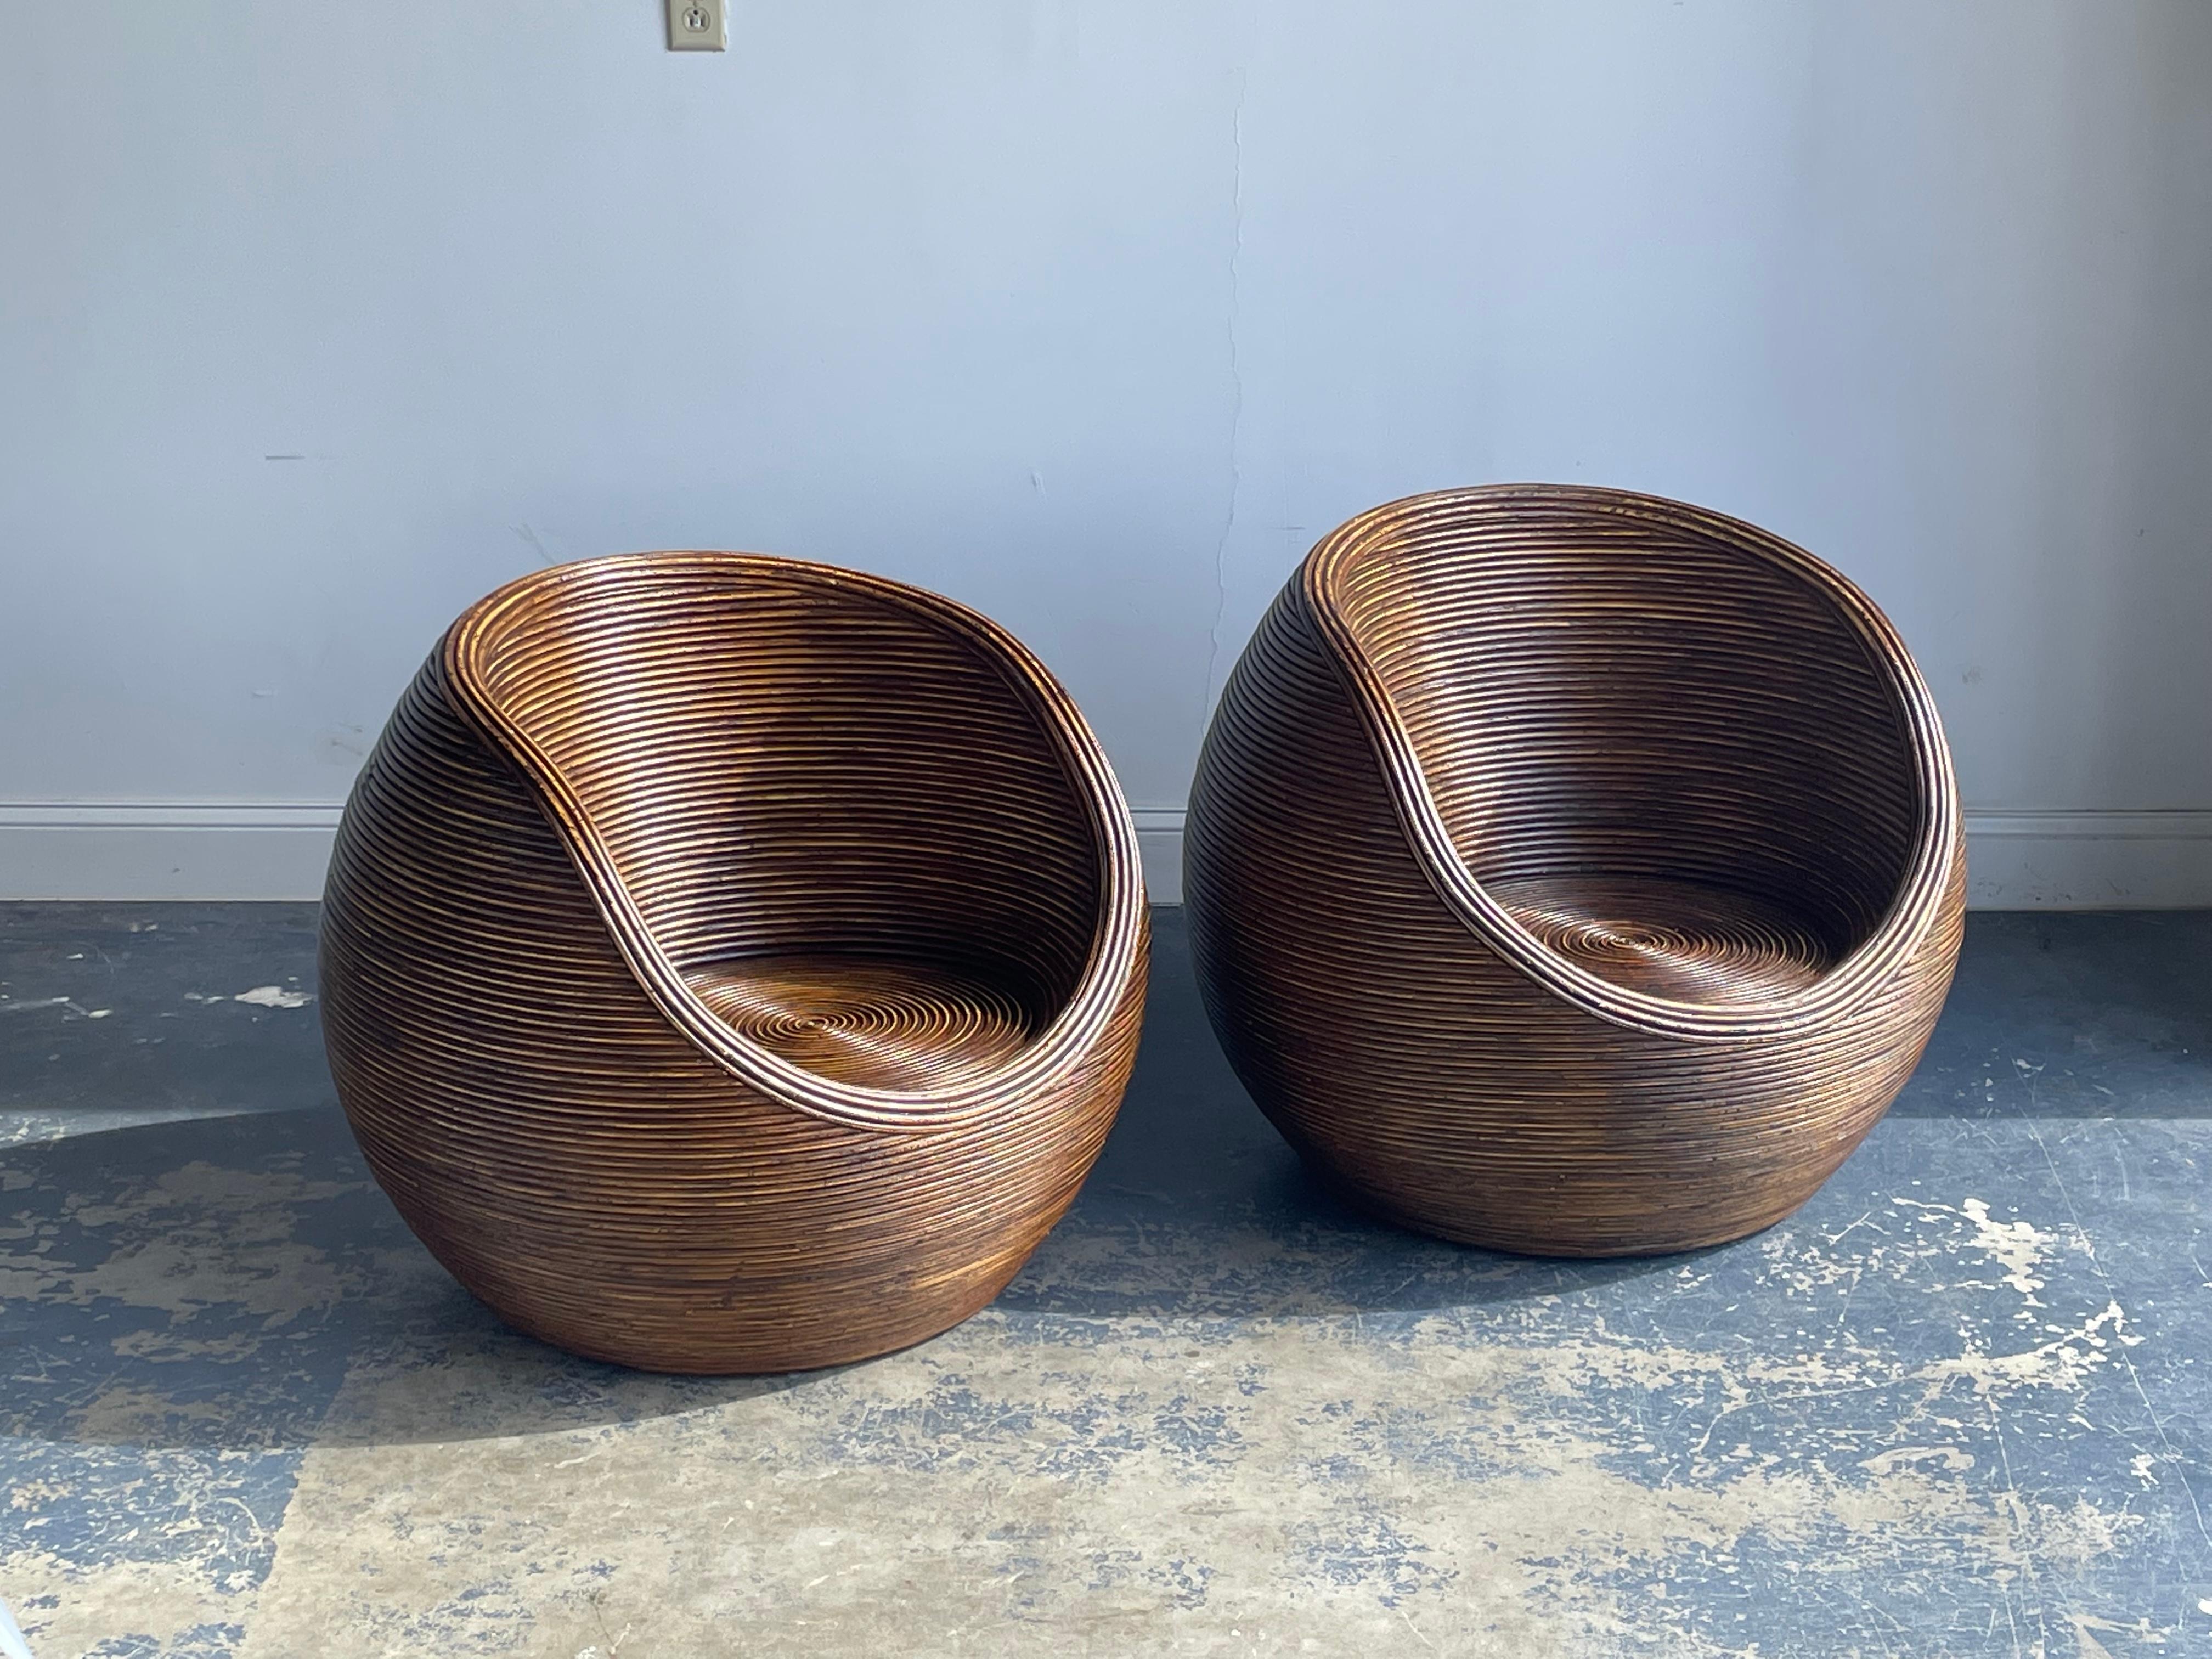 Organic Modernist pair of split reed or pencil reed tub chairs. Wonderful design would blend in a variety settings. Has a very functional sculptural presence. 

Other notable designers from the period include Gabriella Crespi, Adrian Pearsall,